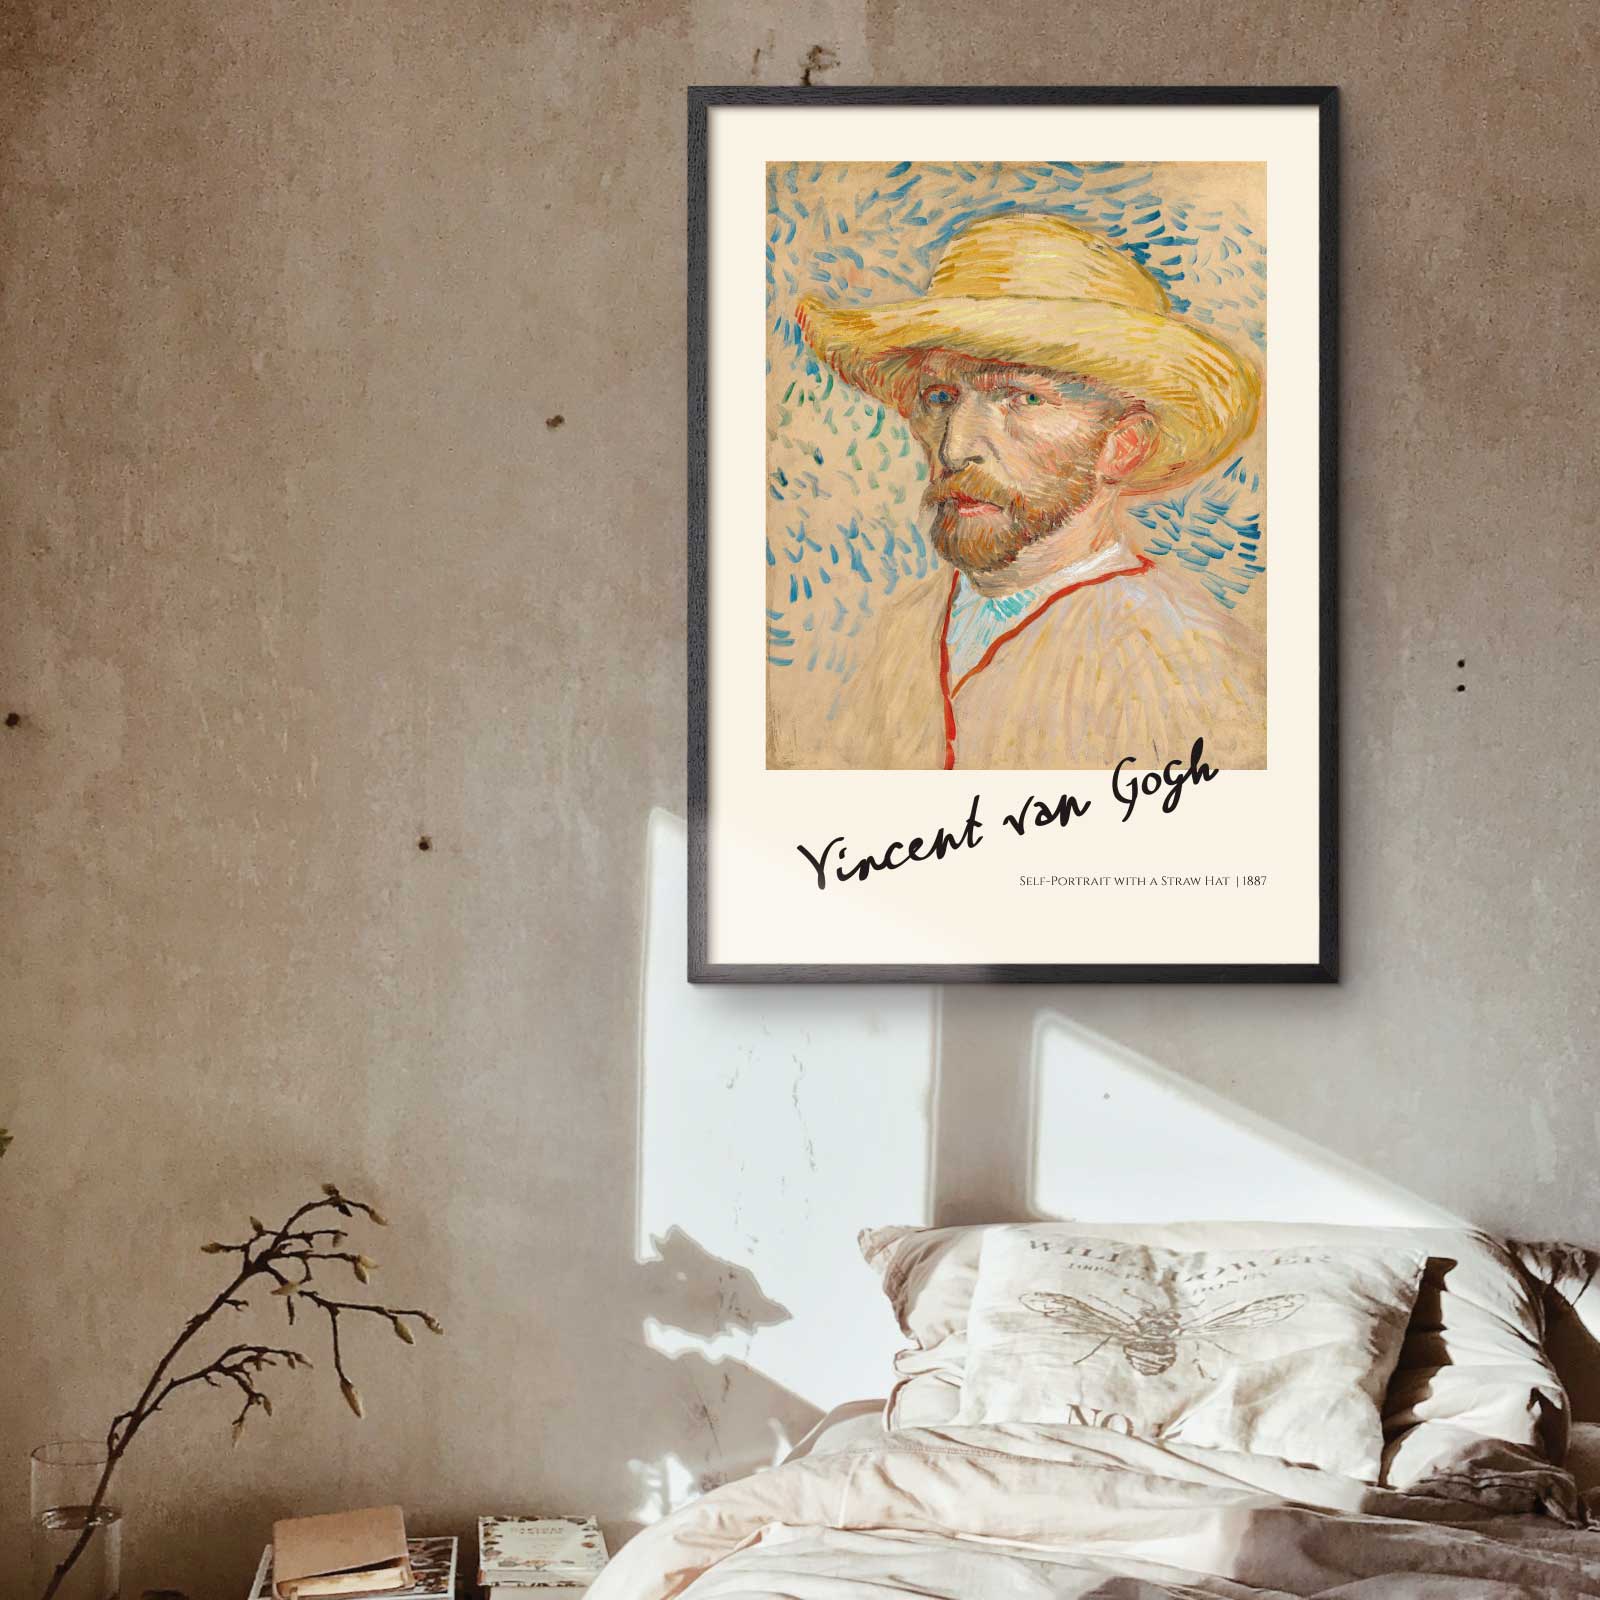 Art poster with "Self portrait with straw hat" by van Gogh